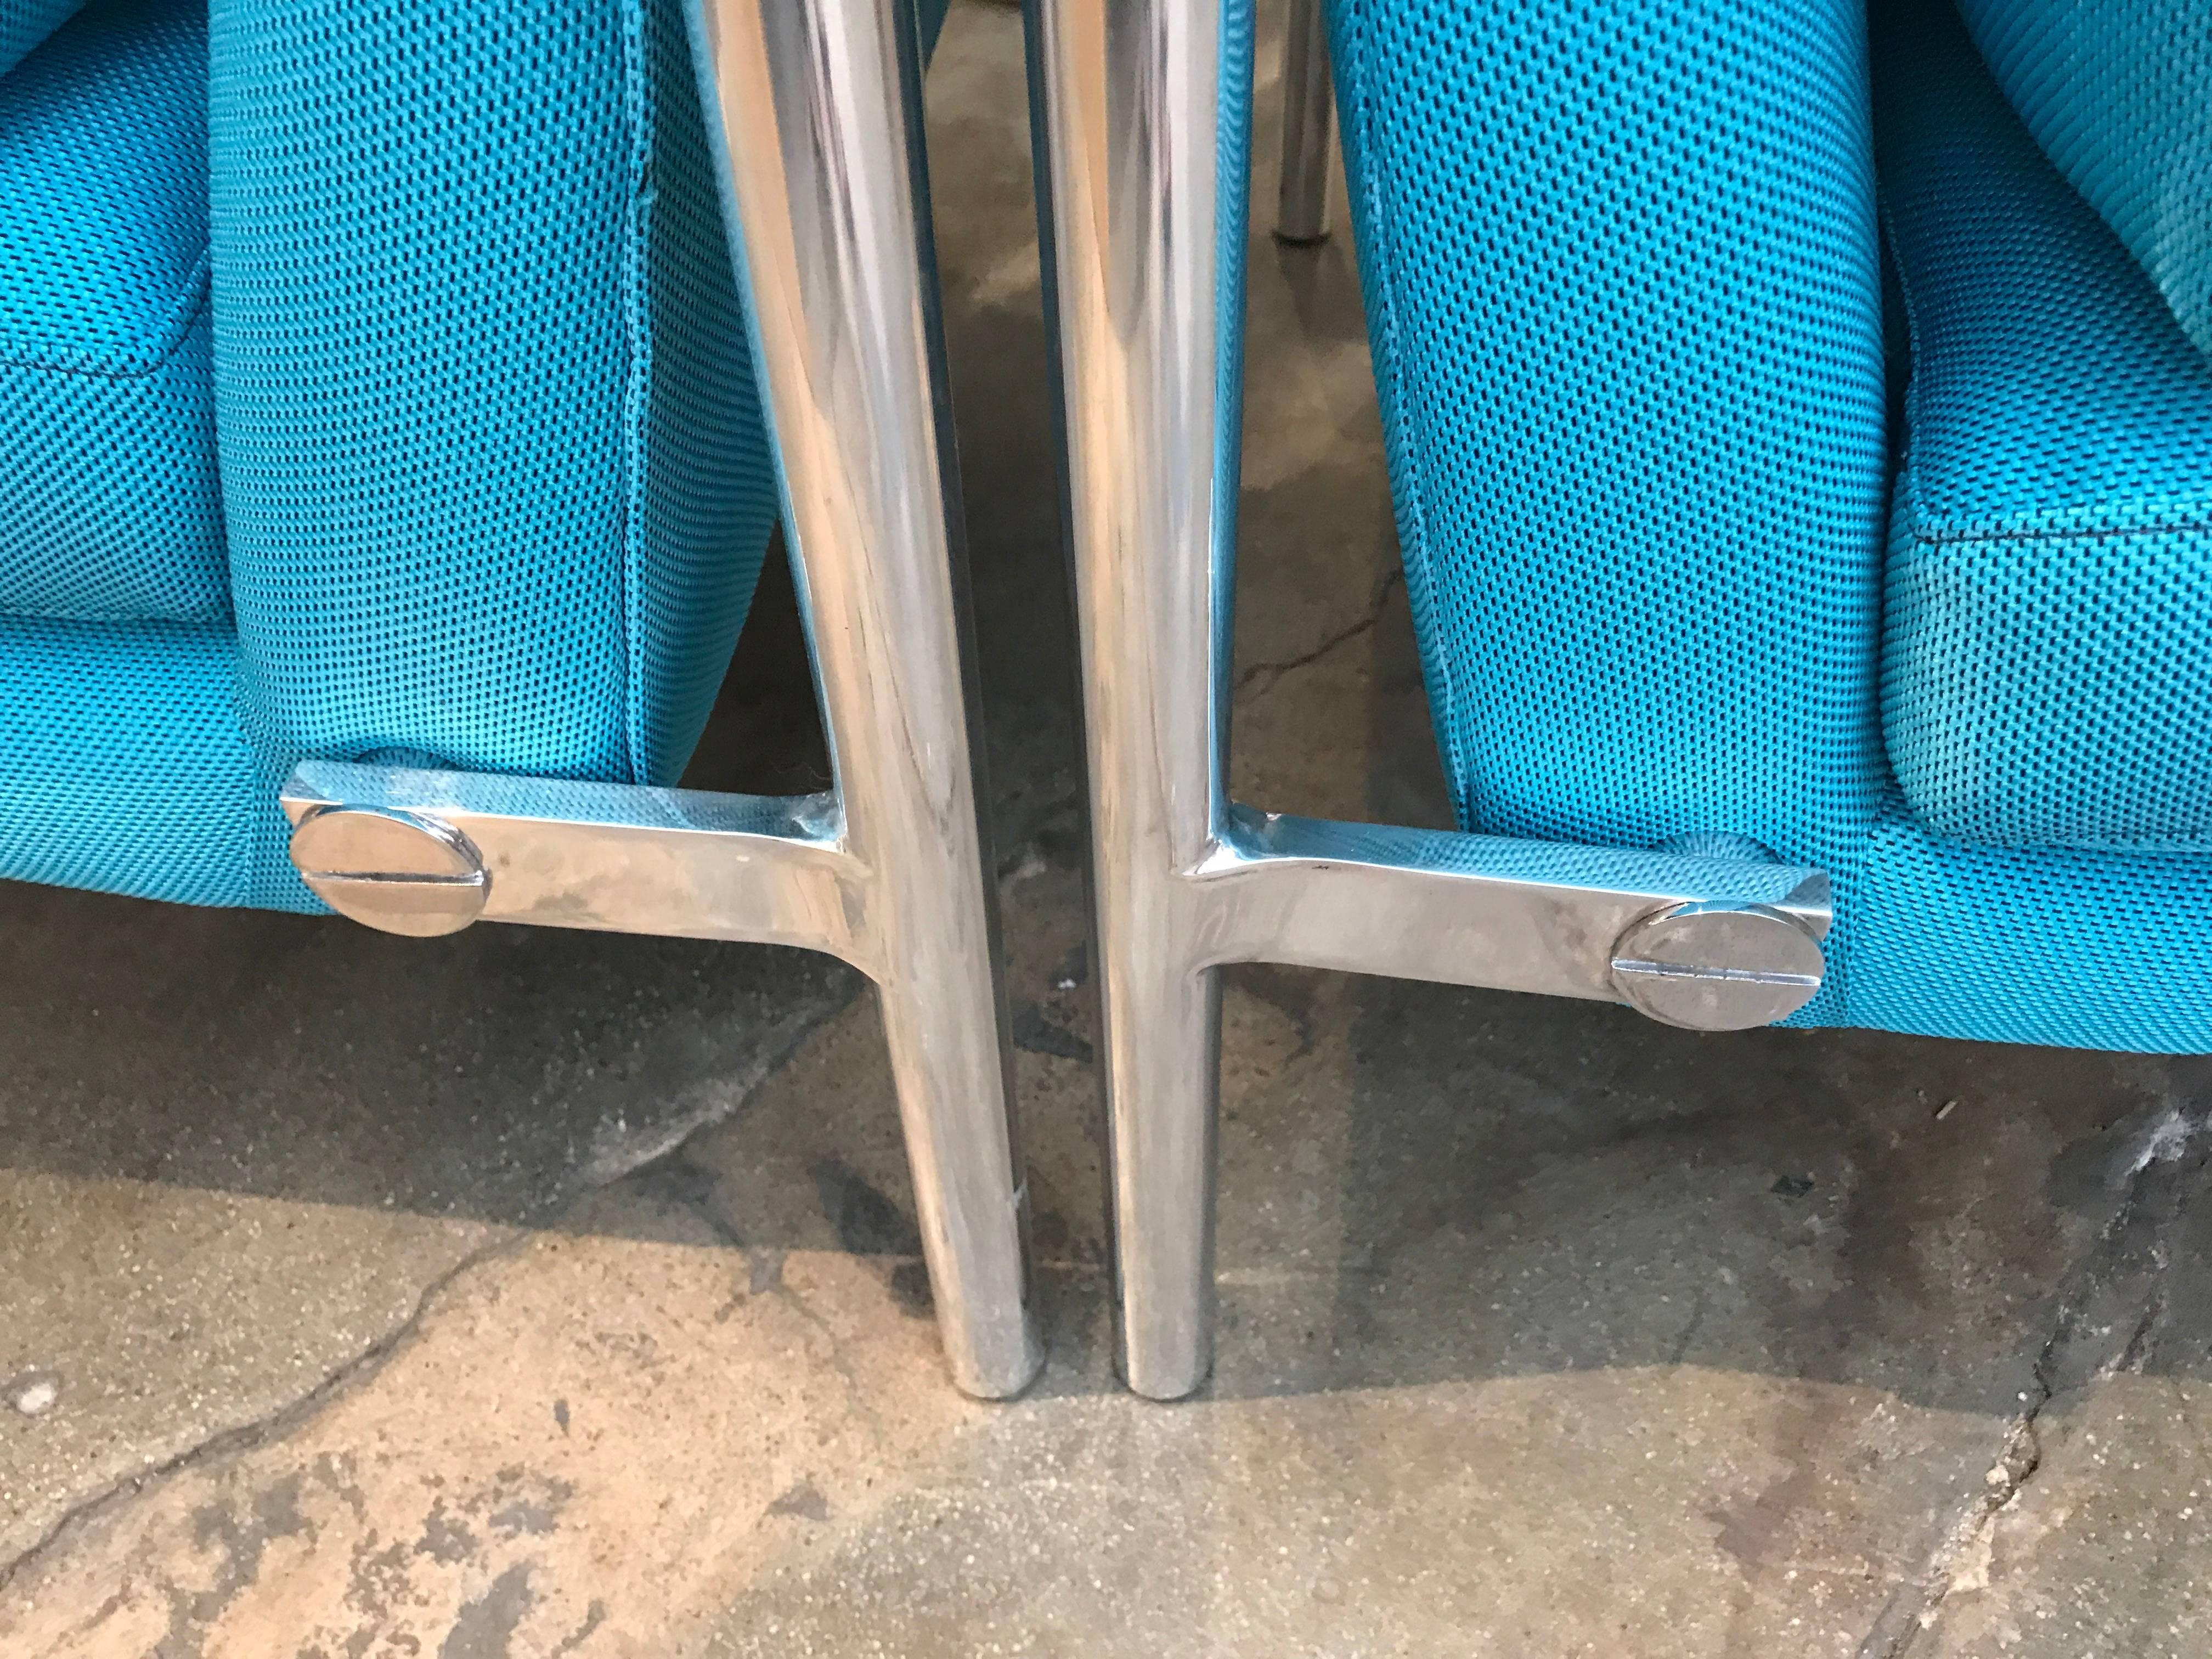 Polished aluminium frame lounge chairs, in the manner of Harvey Probber, newly re-upholstered with Turquoise Knoll fabric. A wonderful detailed touch is the exposed oversized flat head screws that support the combination seat and back